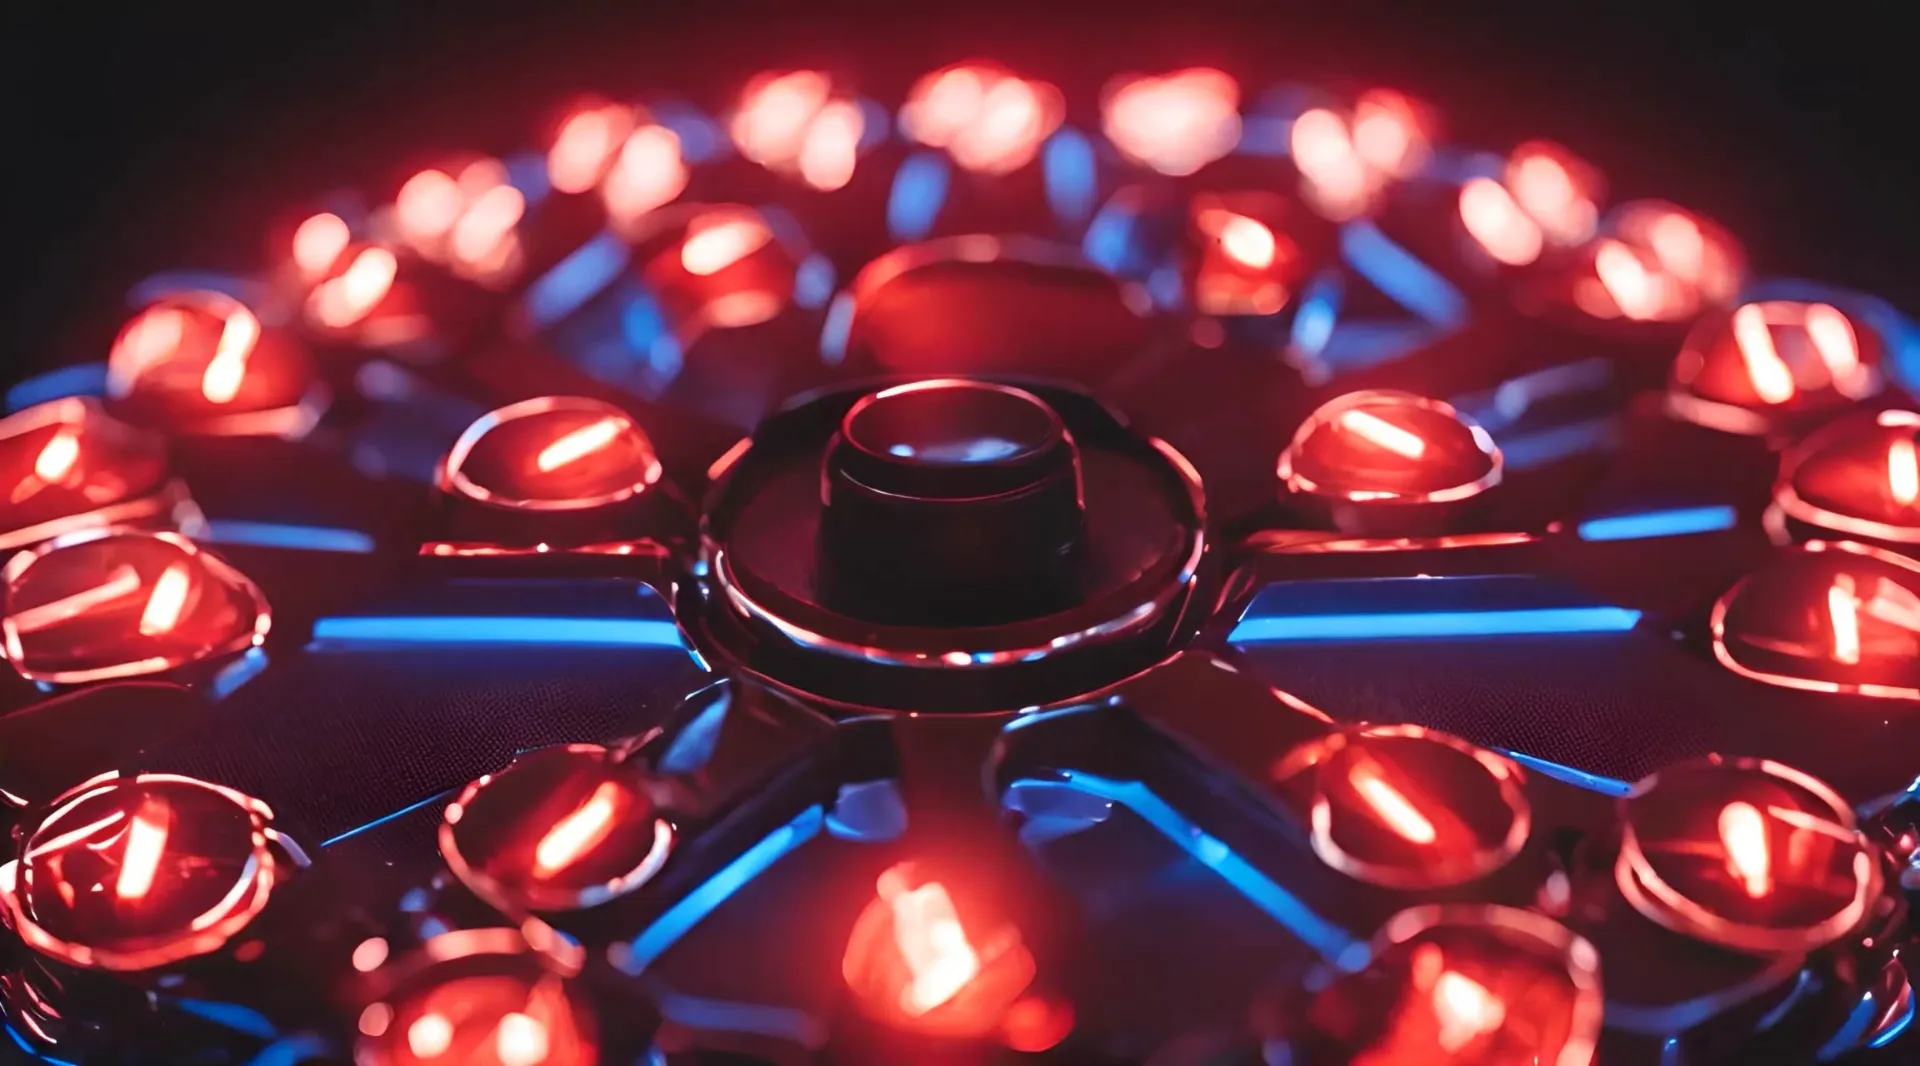 Gleaming Geodesics Red and Blue Light Forms Video Loop